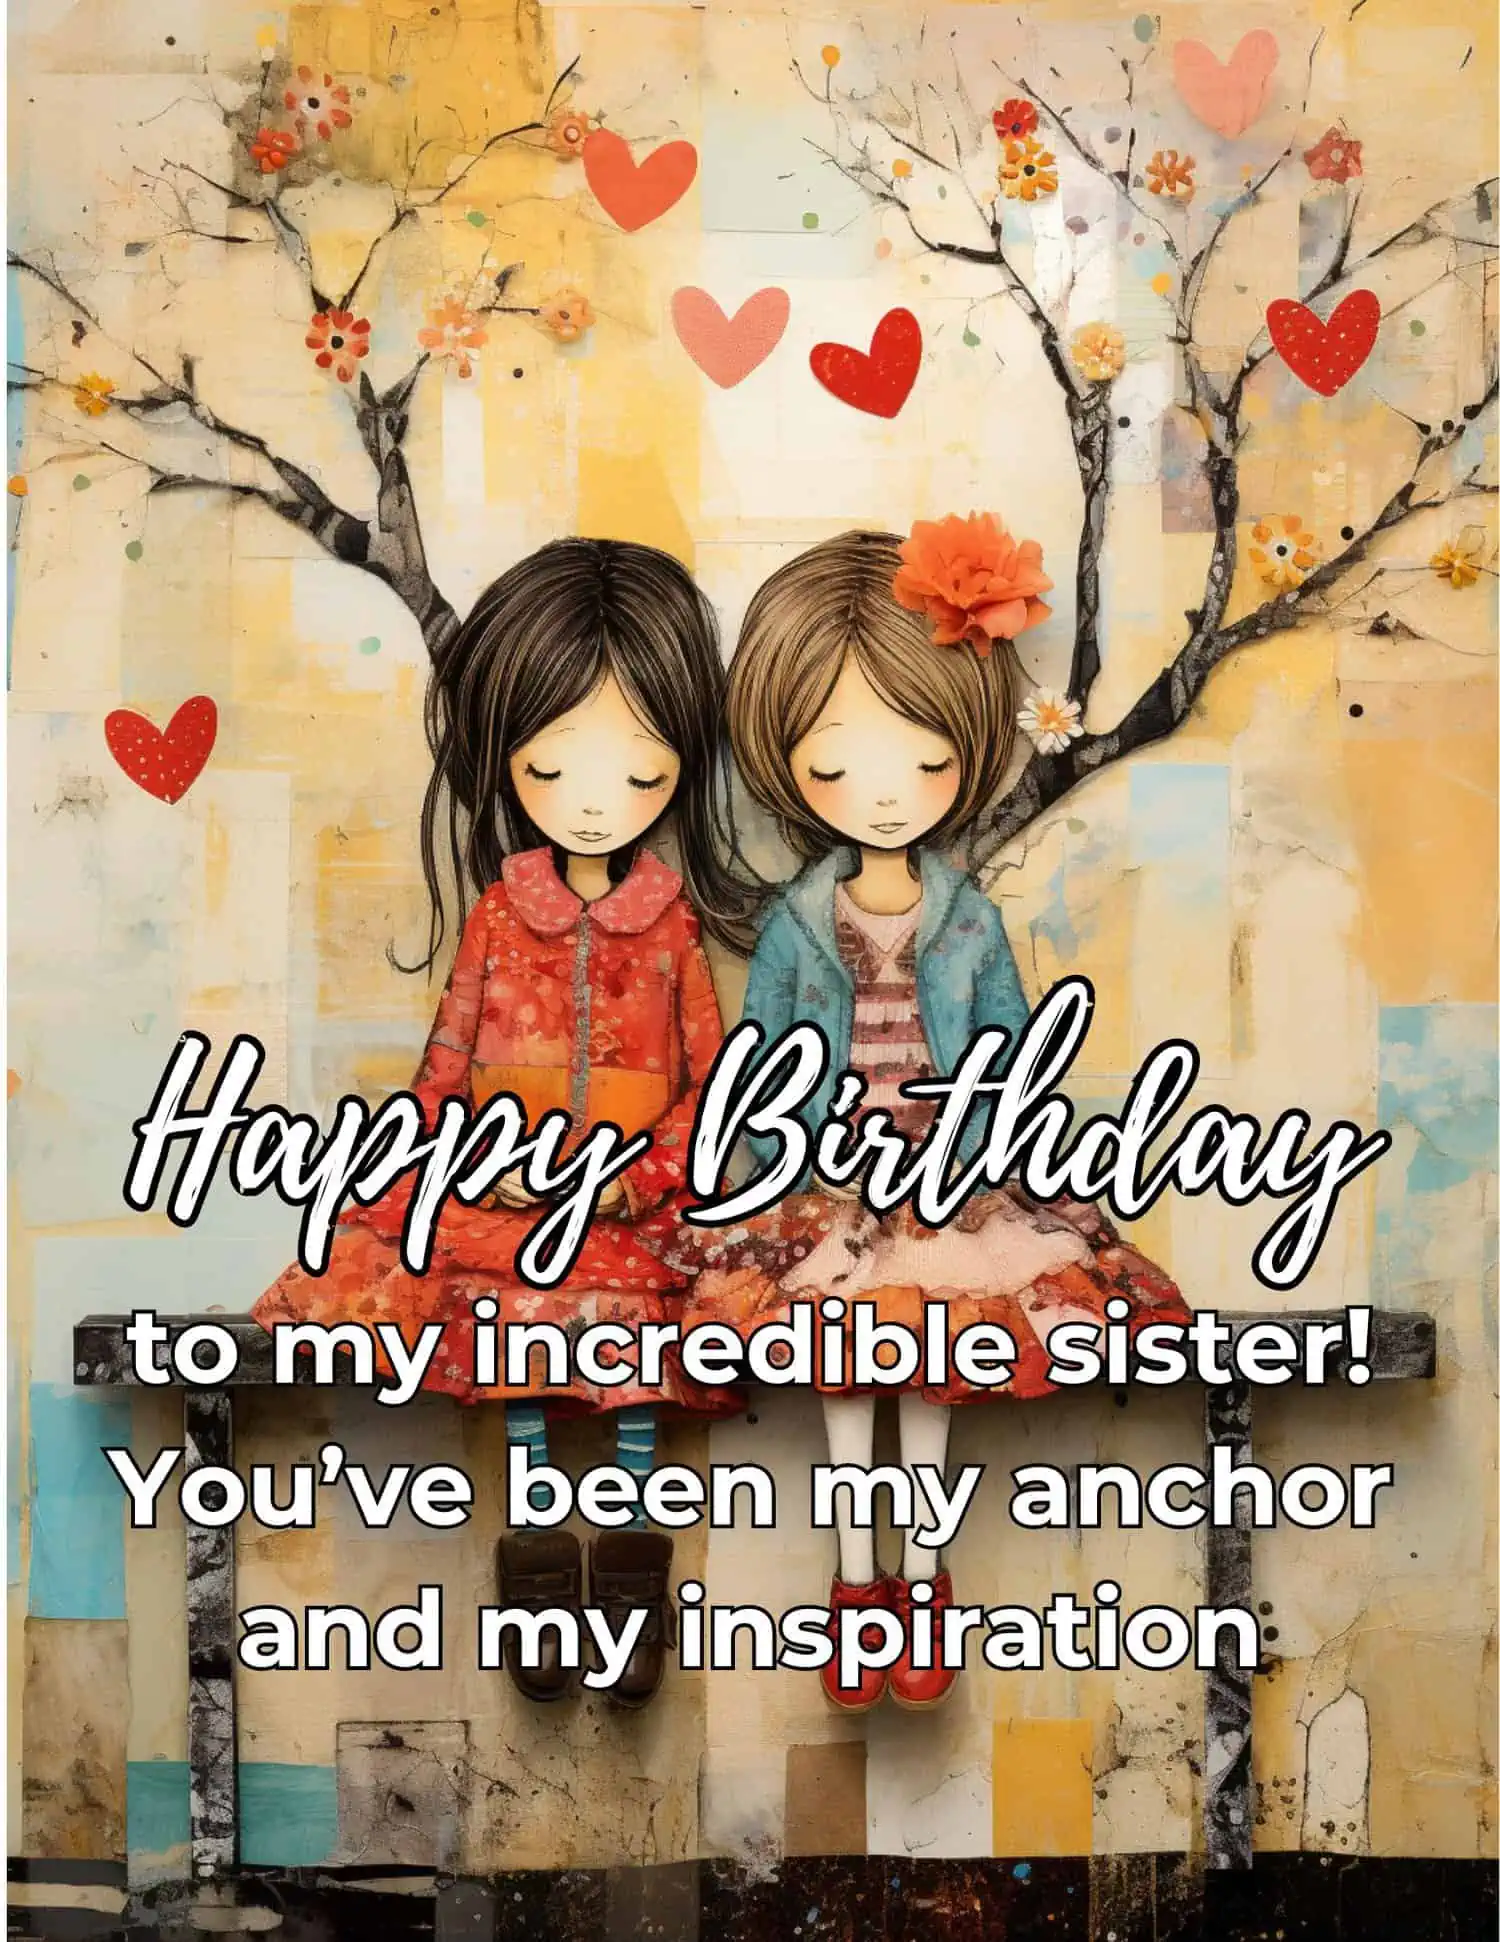 Sister I Love You More Than Words Can Say Birthday Card